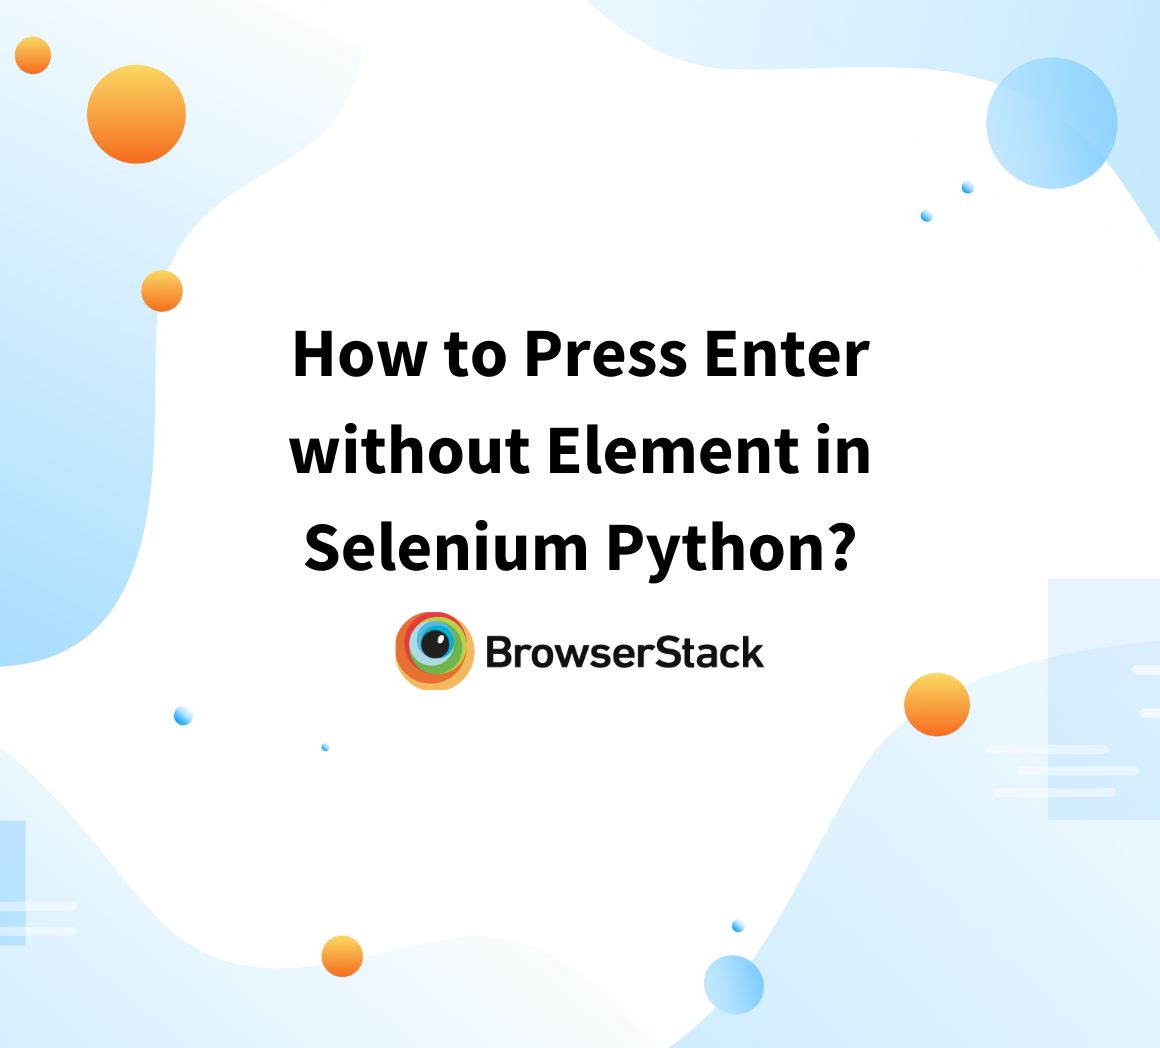 How to Press Enter without Element in Selenium Python